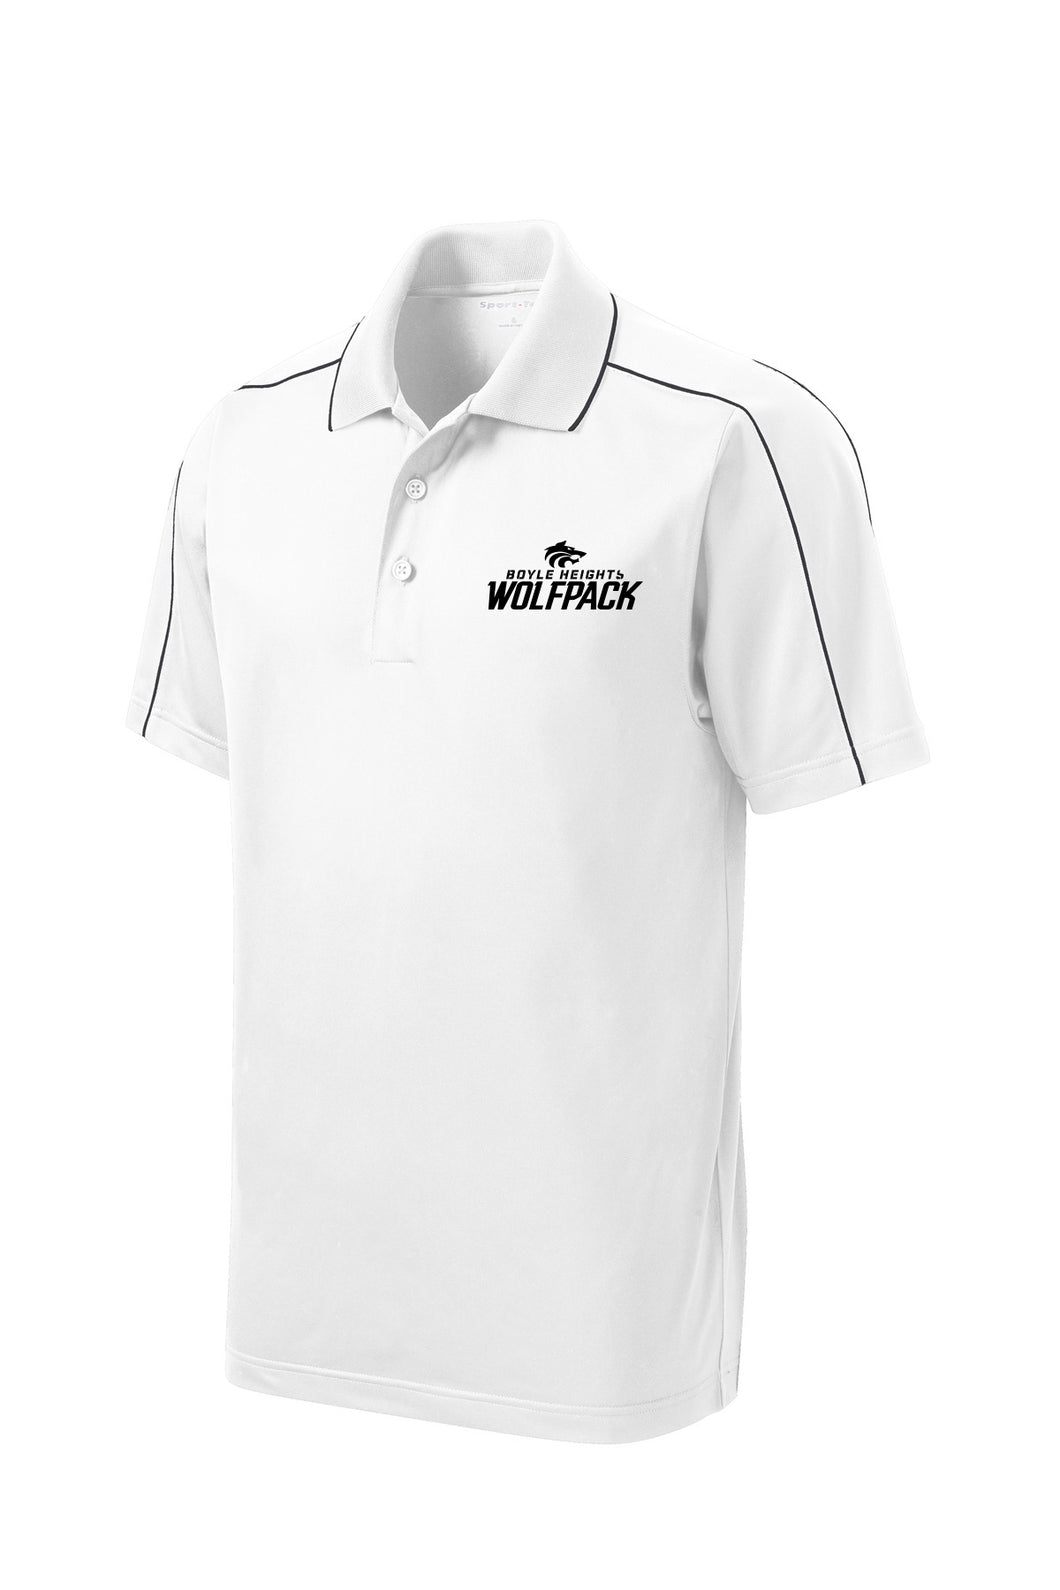 WOLFPACK POLO 2023 - White POLO with Charcoal Trim and Black Logo - USA SIZES